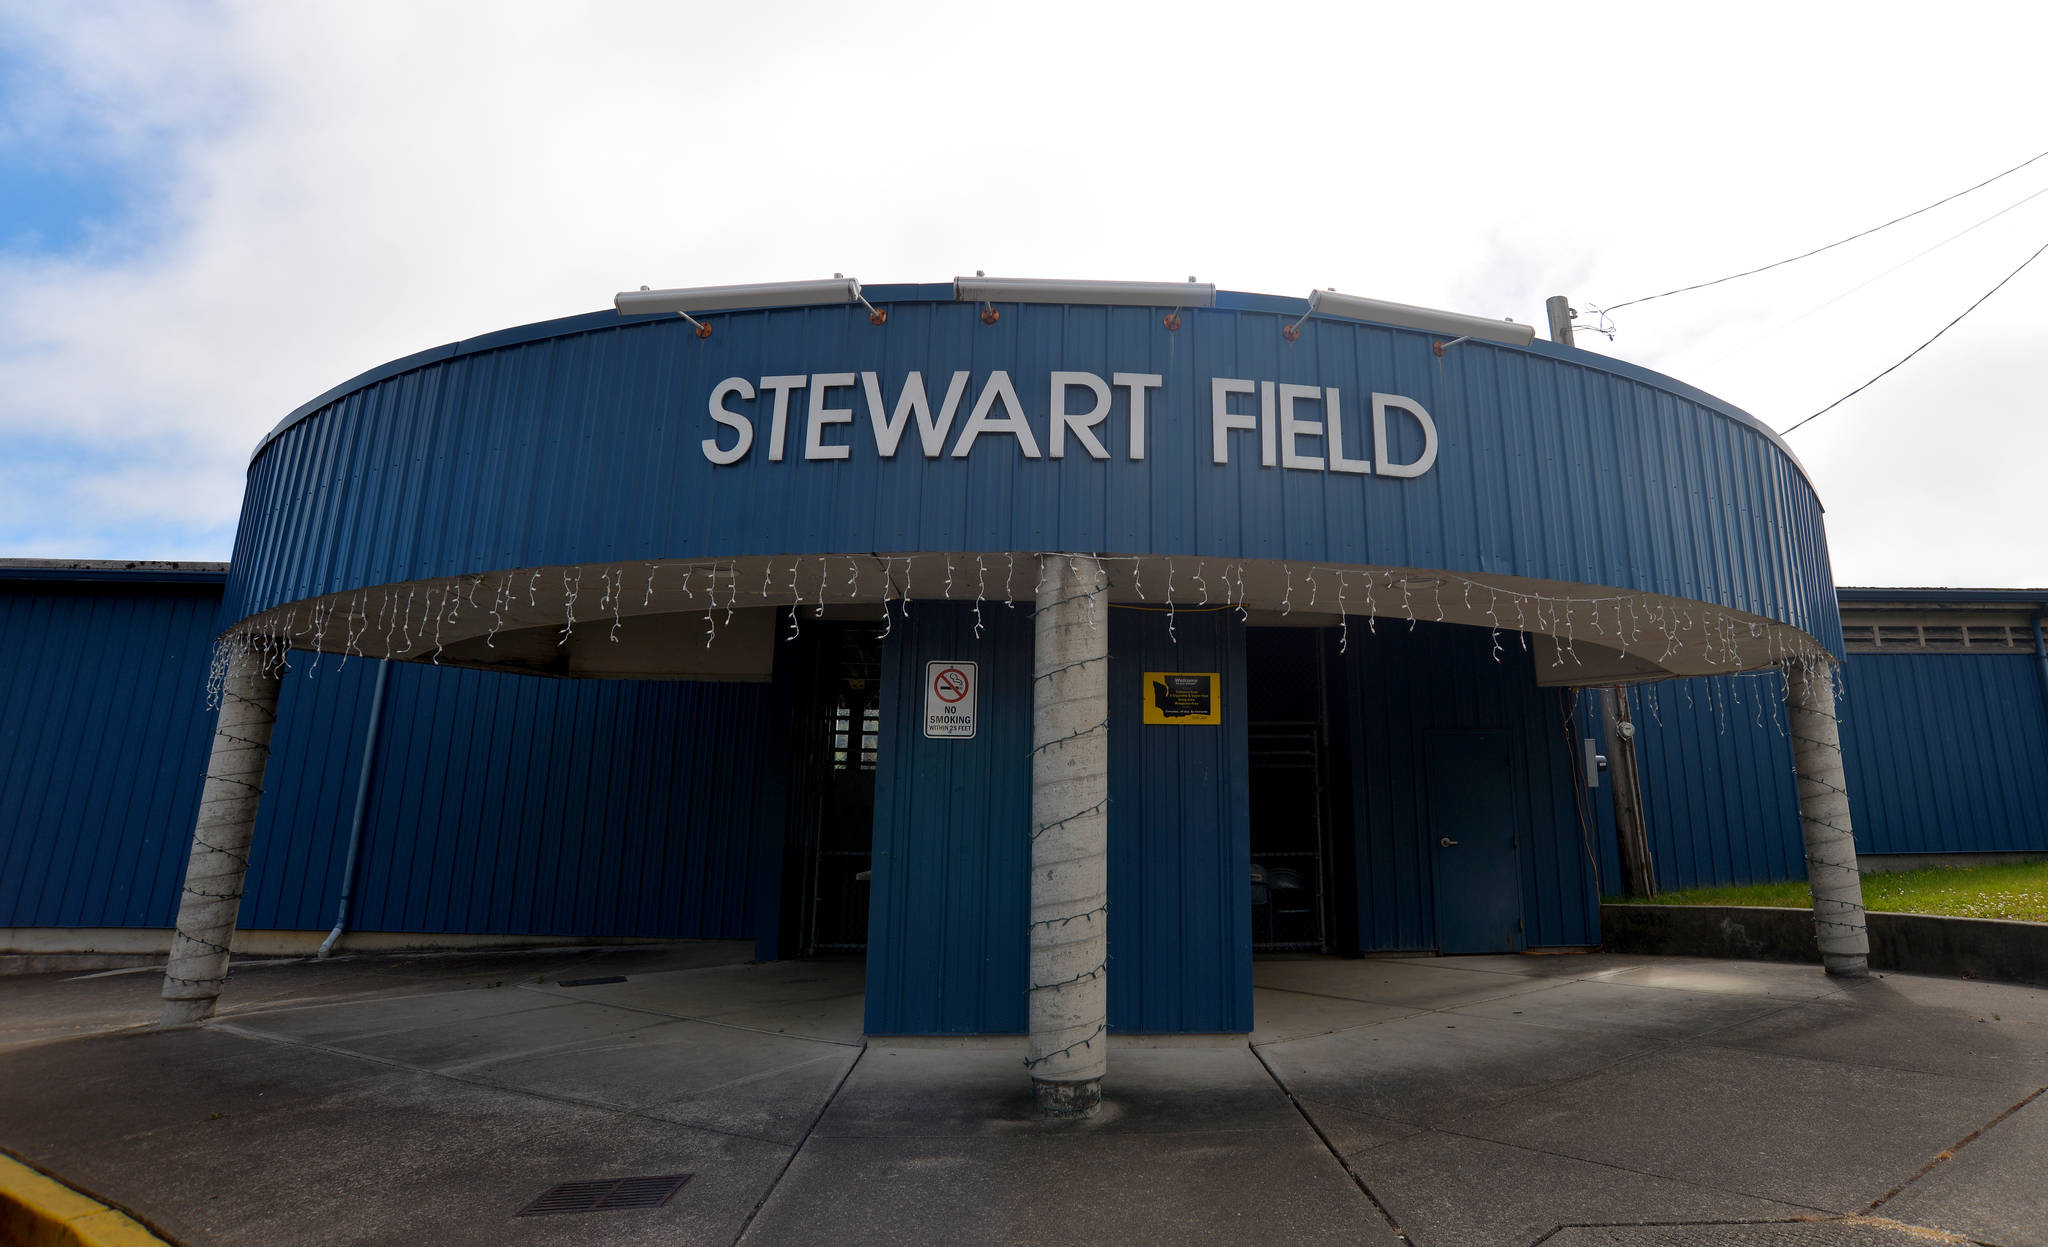 DAVE HAVILAND | THE DAILY WORLD
Stewart Field in Aberdeen will host graduation ceremonies for more than 200 AHS seniors and their guests on June 11.